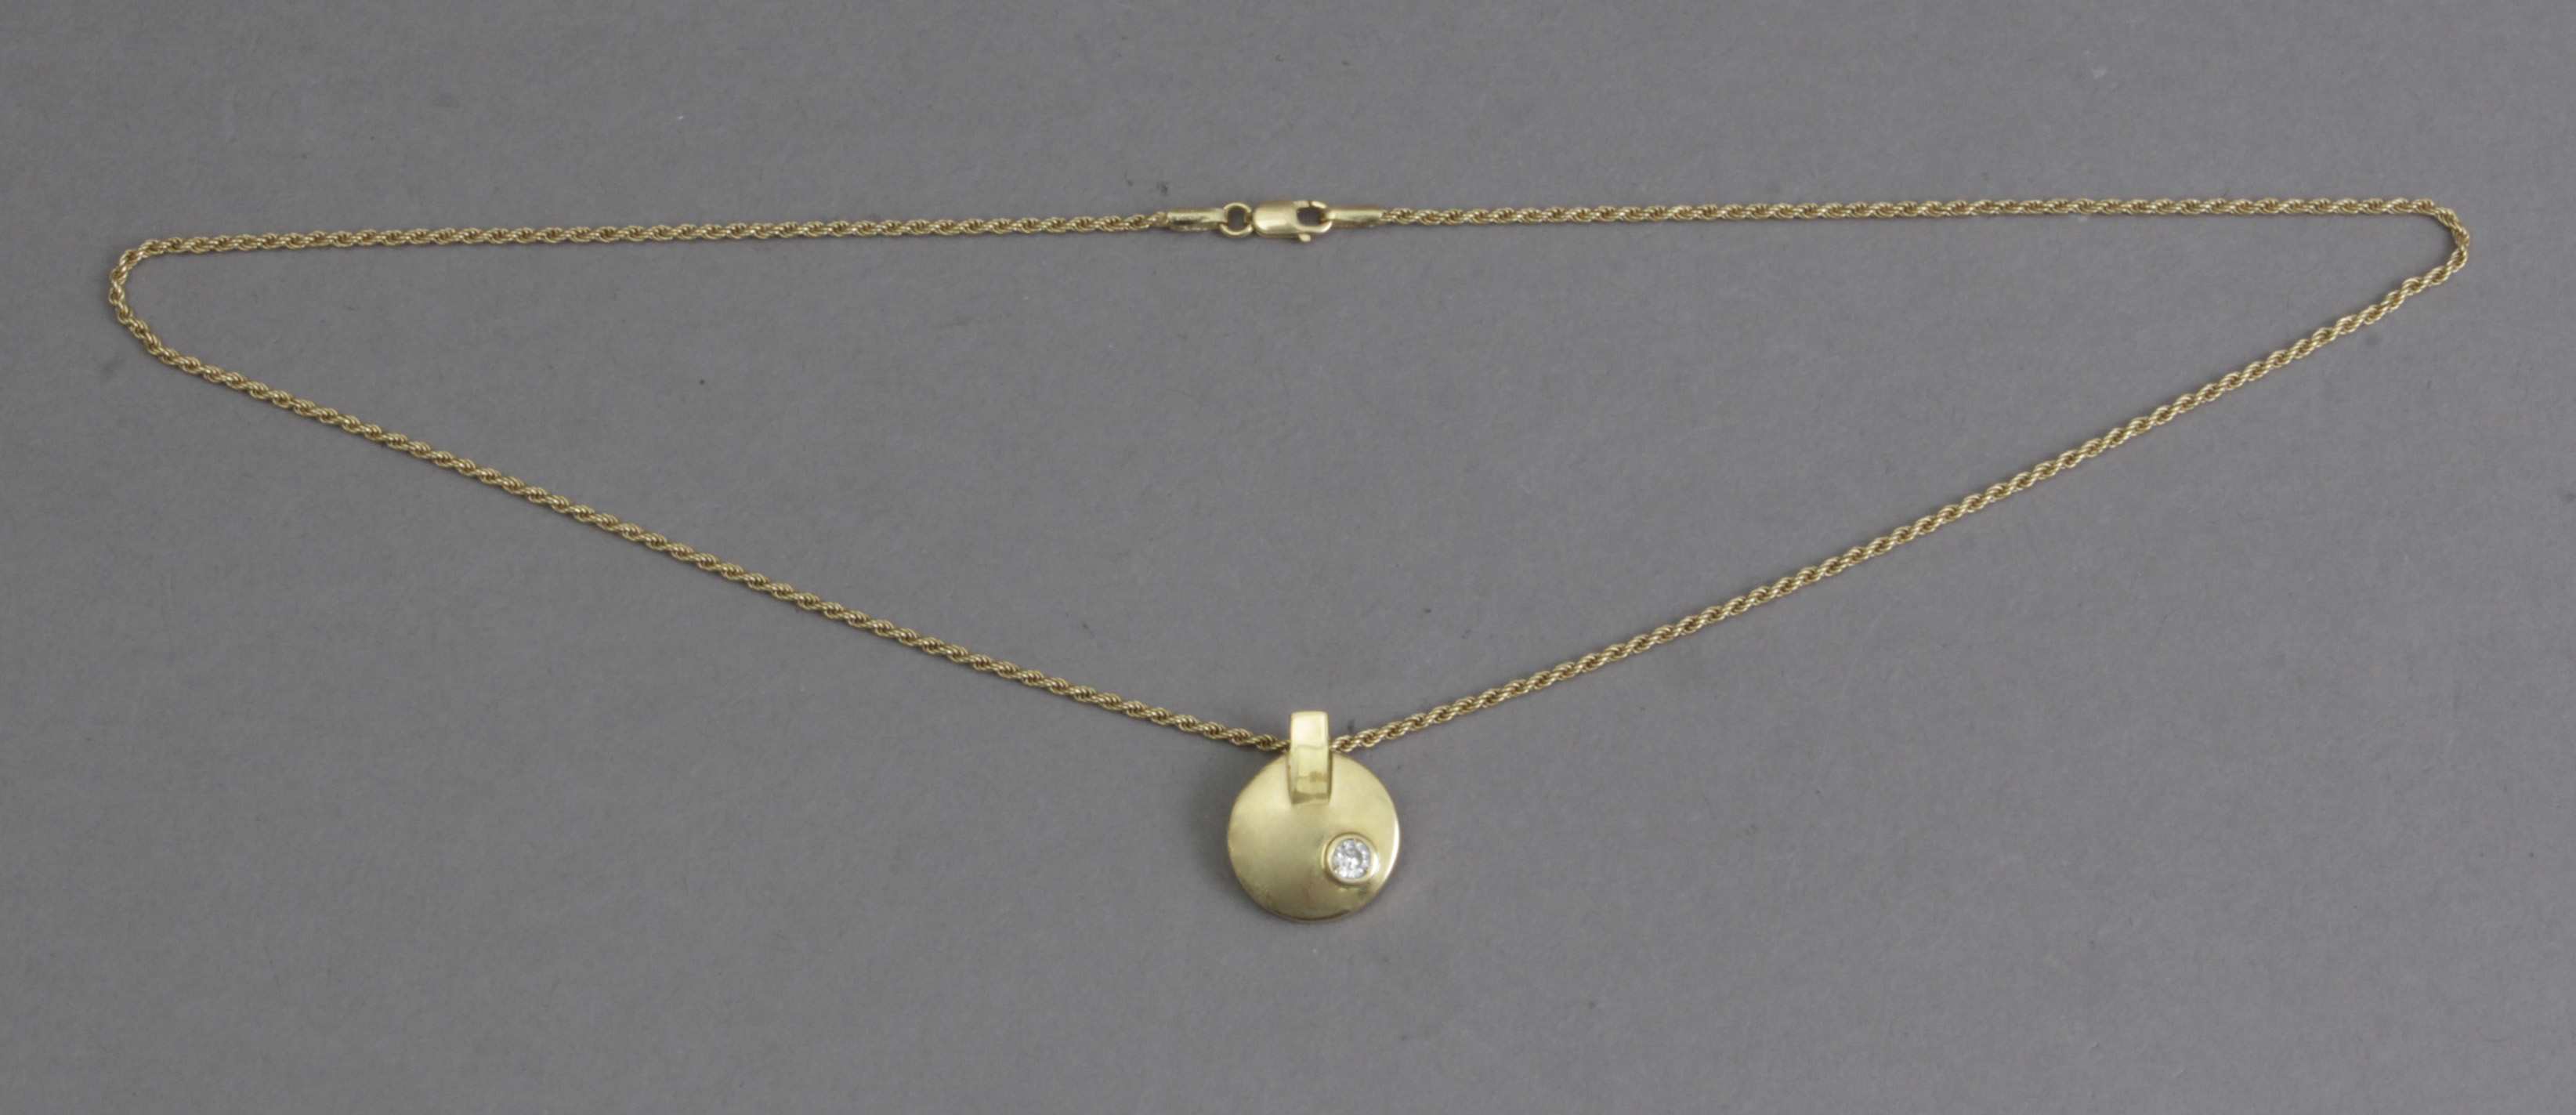 A diamond and gold pendant and chain - Image 3 of 4